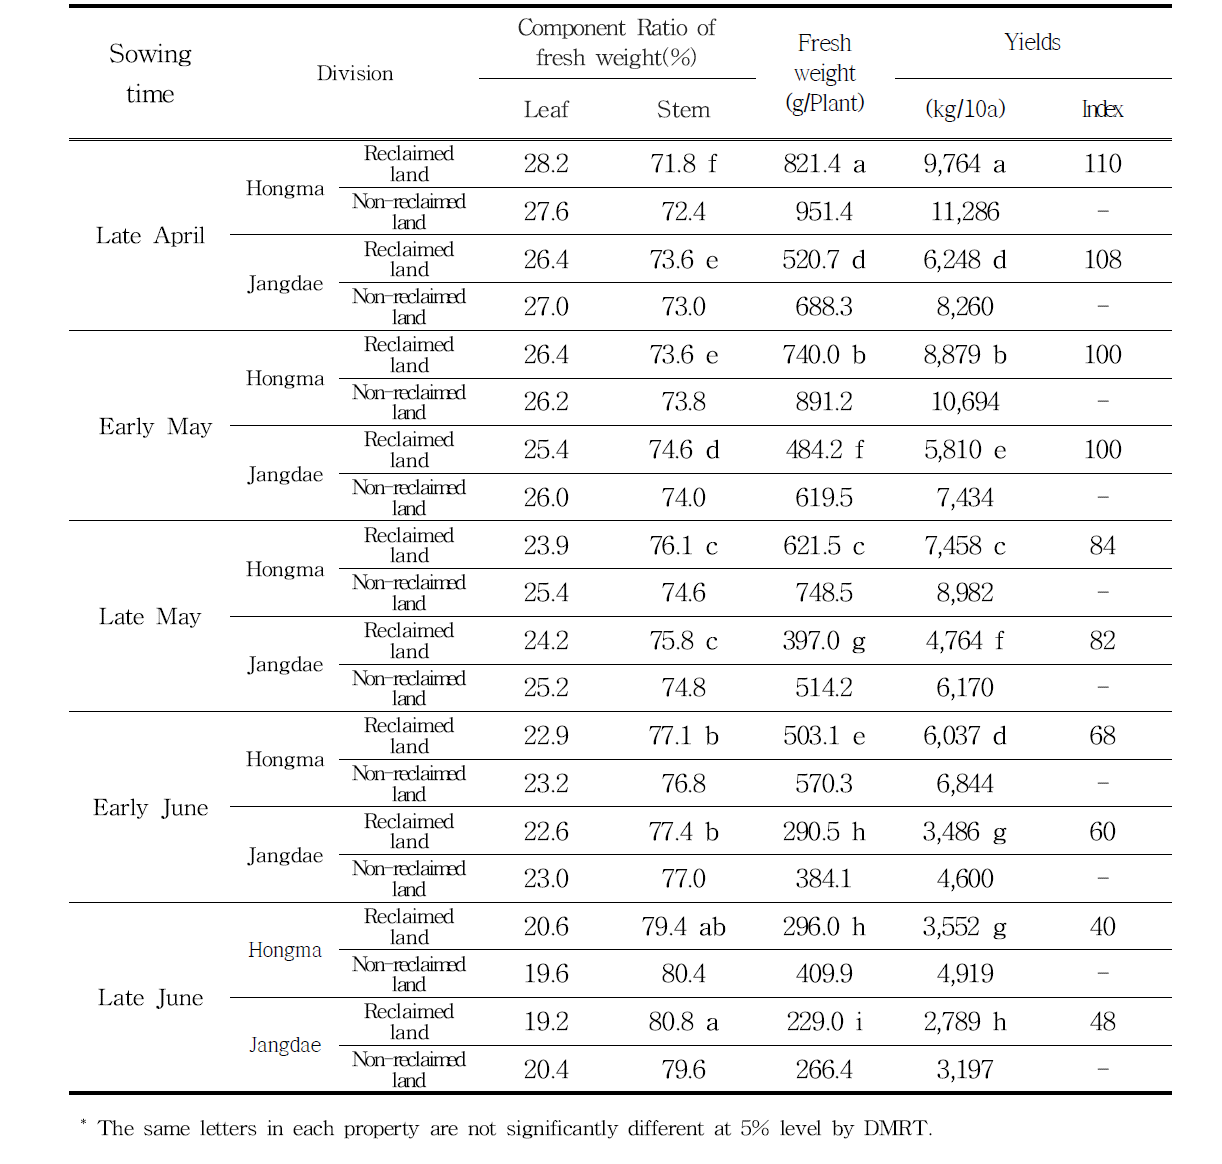 The yields and yield components of kenaf based on sowing time in reclaimed land